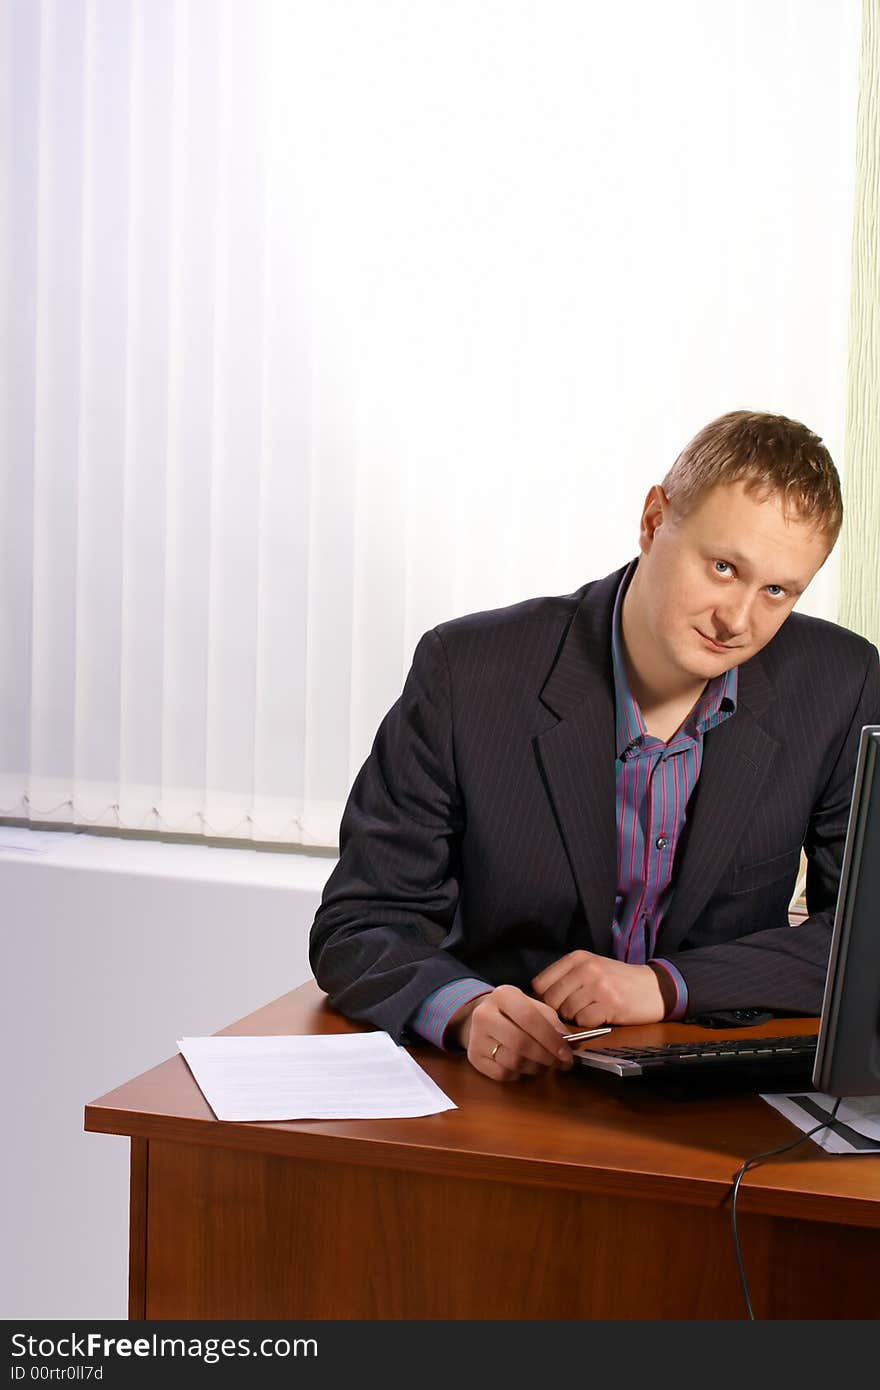 The businessman sitting at a table with a computer